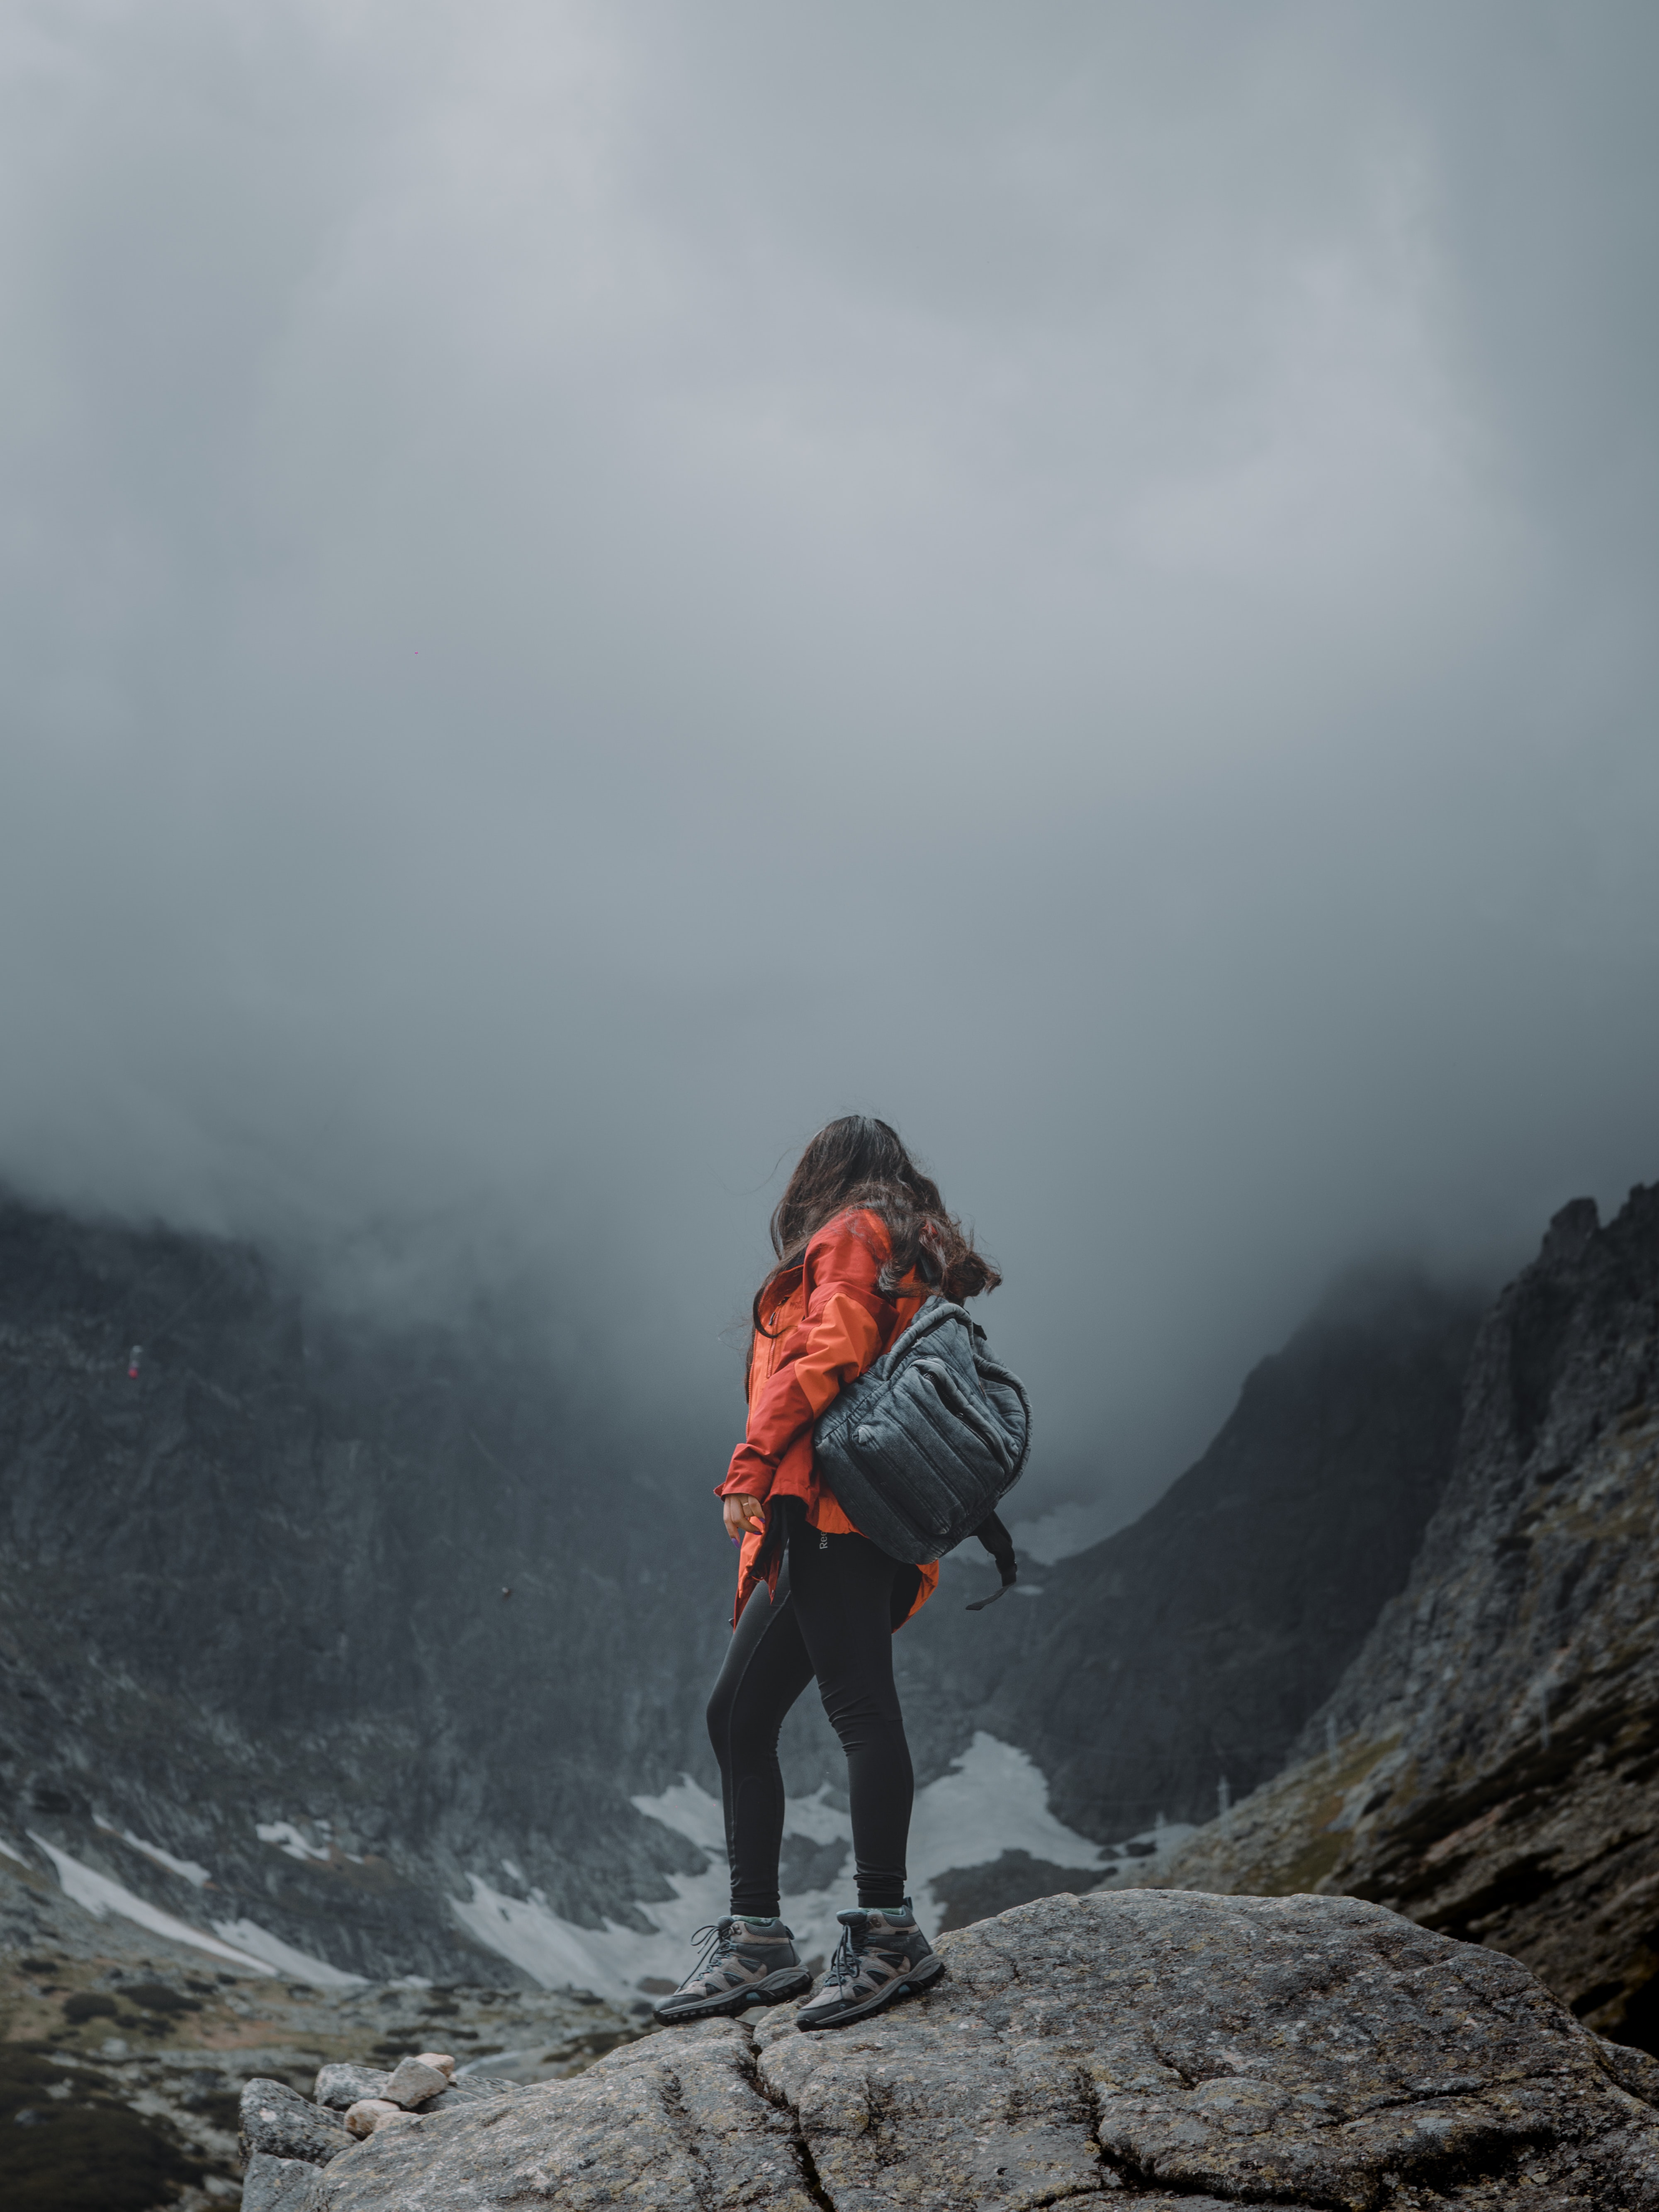 alone, girl, loneliness, fog, journey, rocks, miscellanea, miscellaneous, lonely, backpack, rucksack